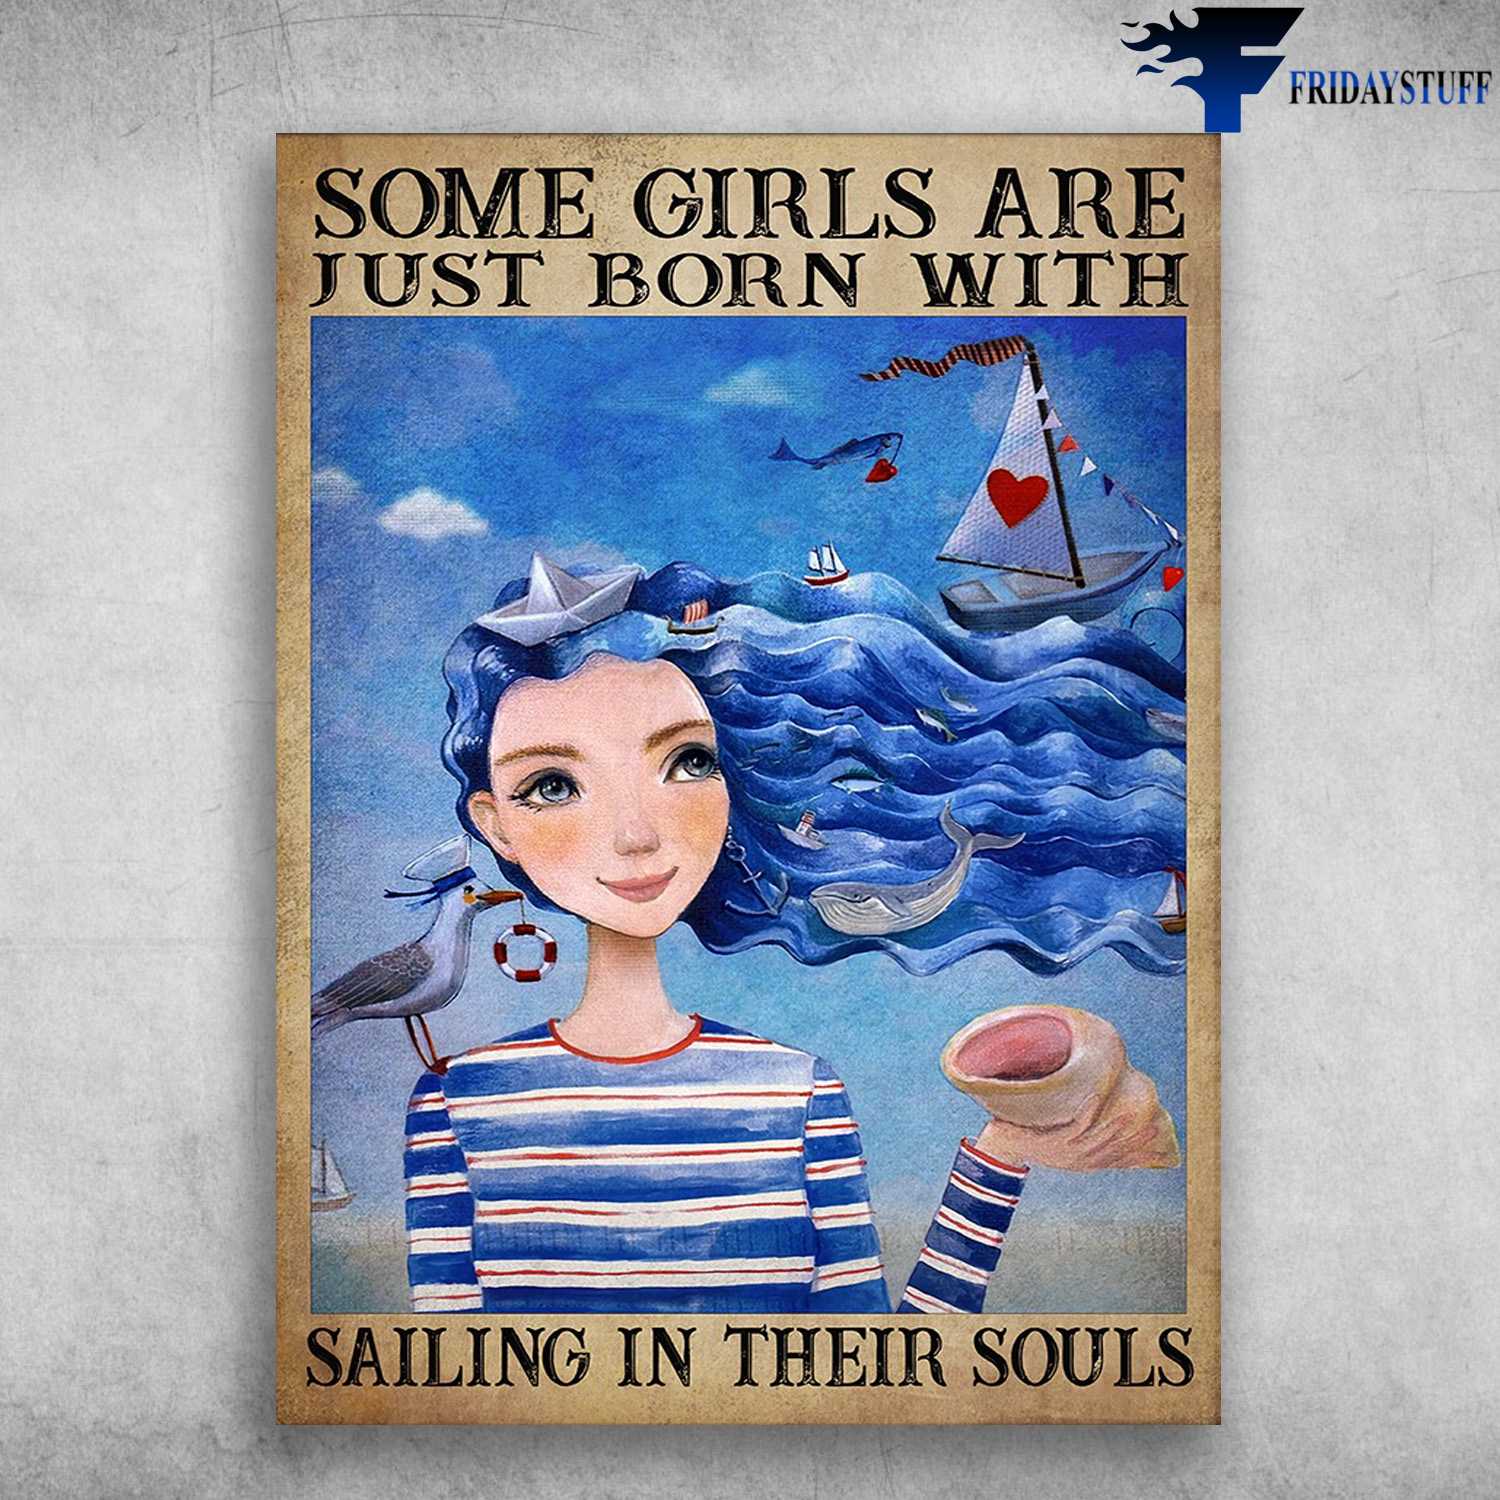 Female Sailor, Sailing Girl - Some Girls Are Just Born With, Sailing In Their Souls